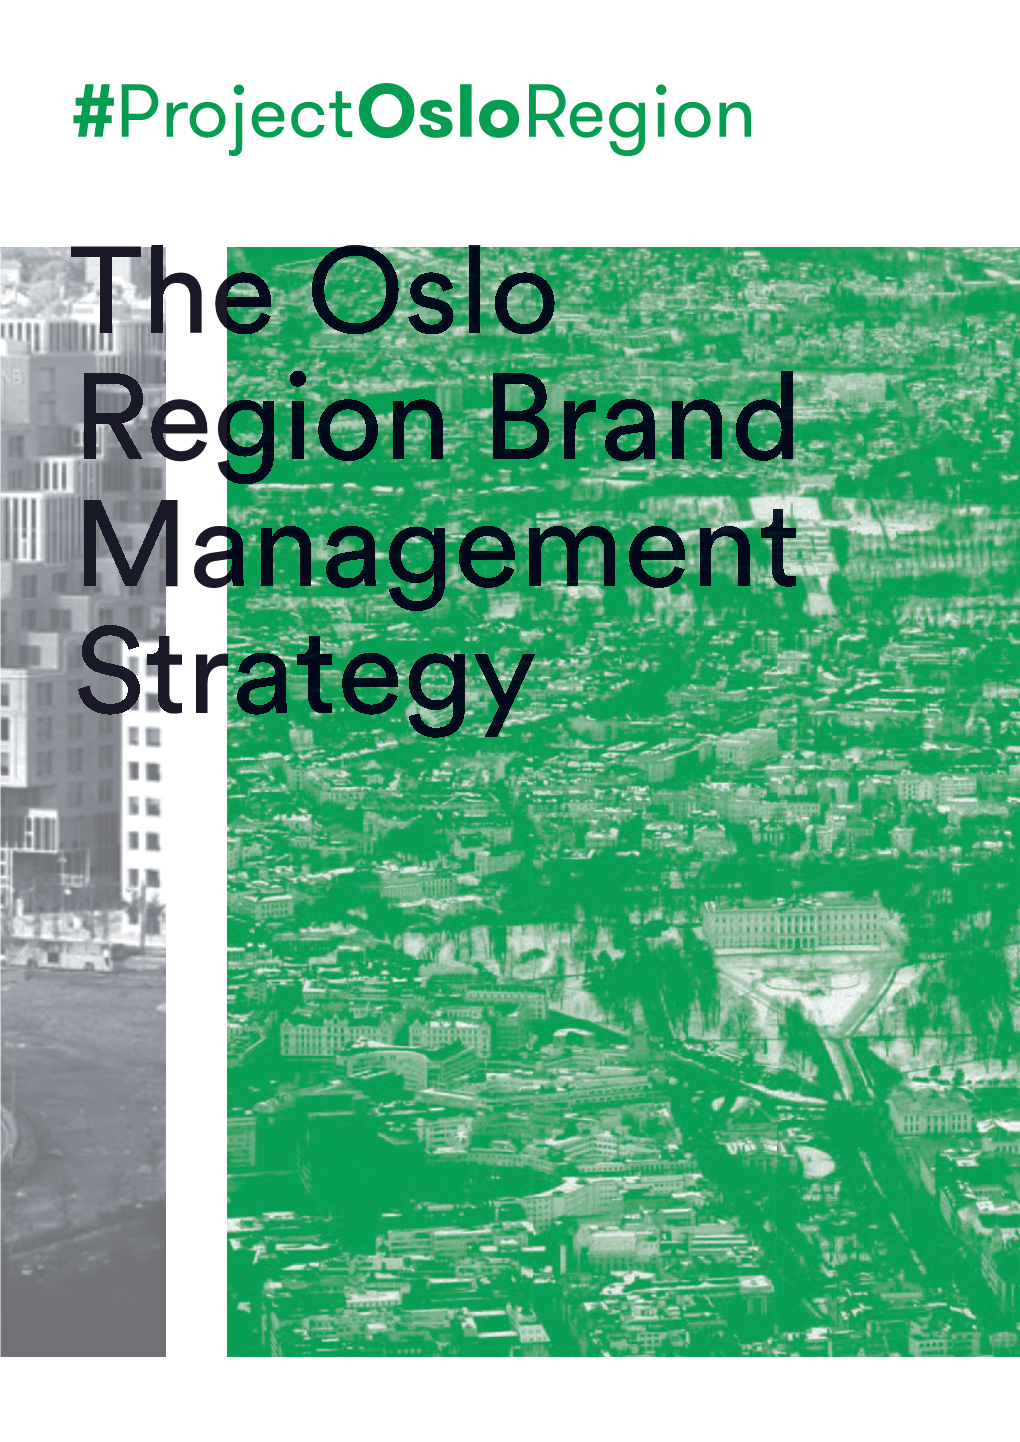 The Oslo Region Brand Management Strategy Designed by Metric | Metricdesign.No Photo by Thomas Ekstrom (Except Where Noted) the Oslo Region Brand Management Strategy